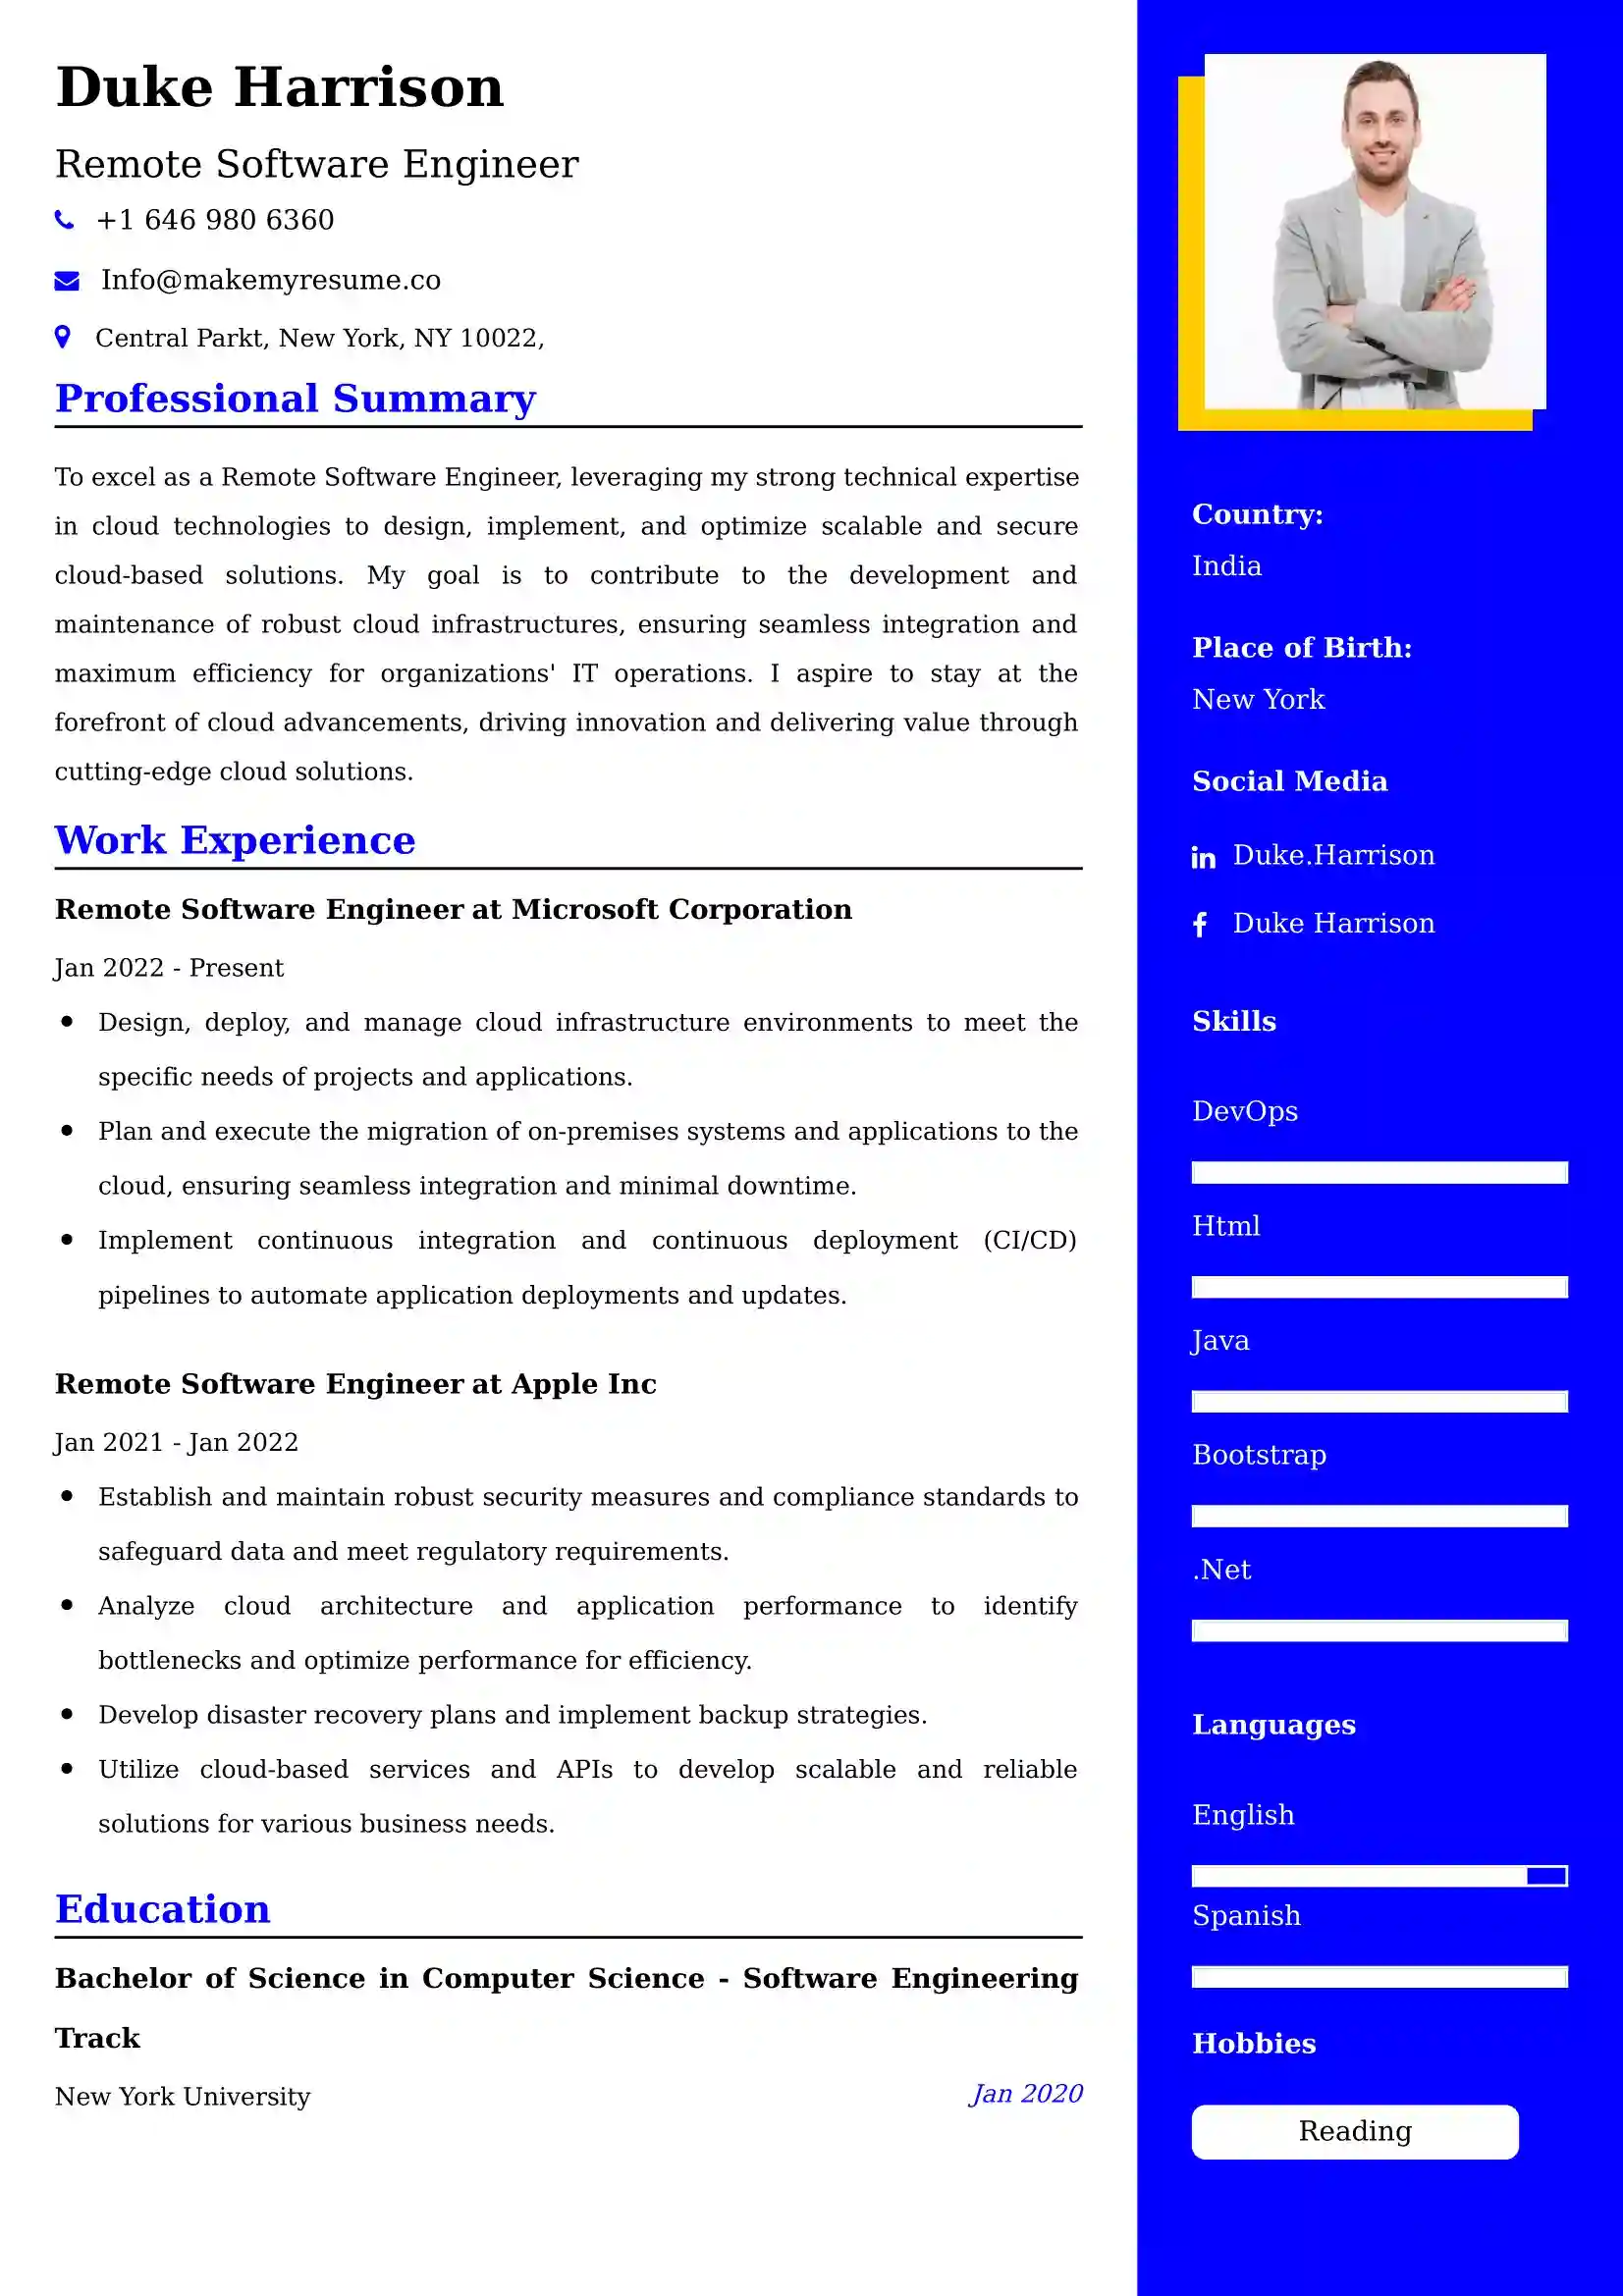 Remote Software Engineer CV Examples Malaysia